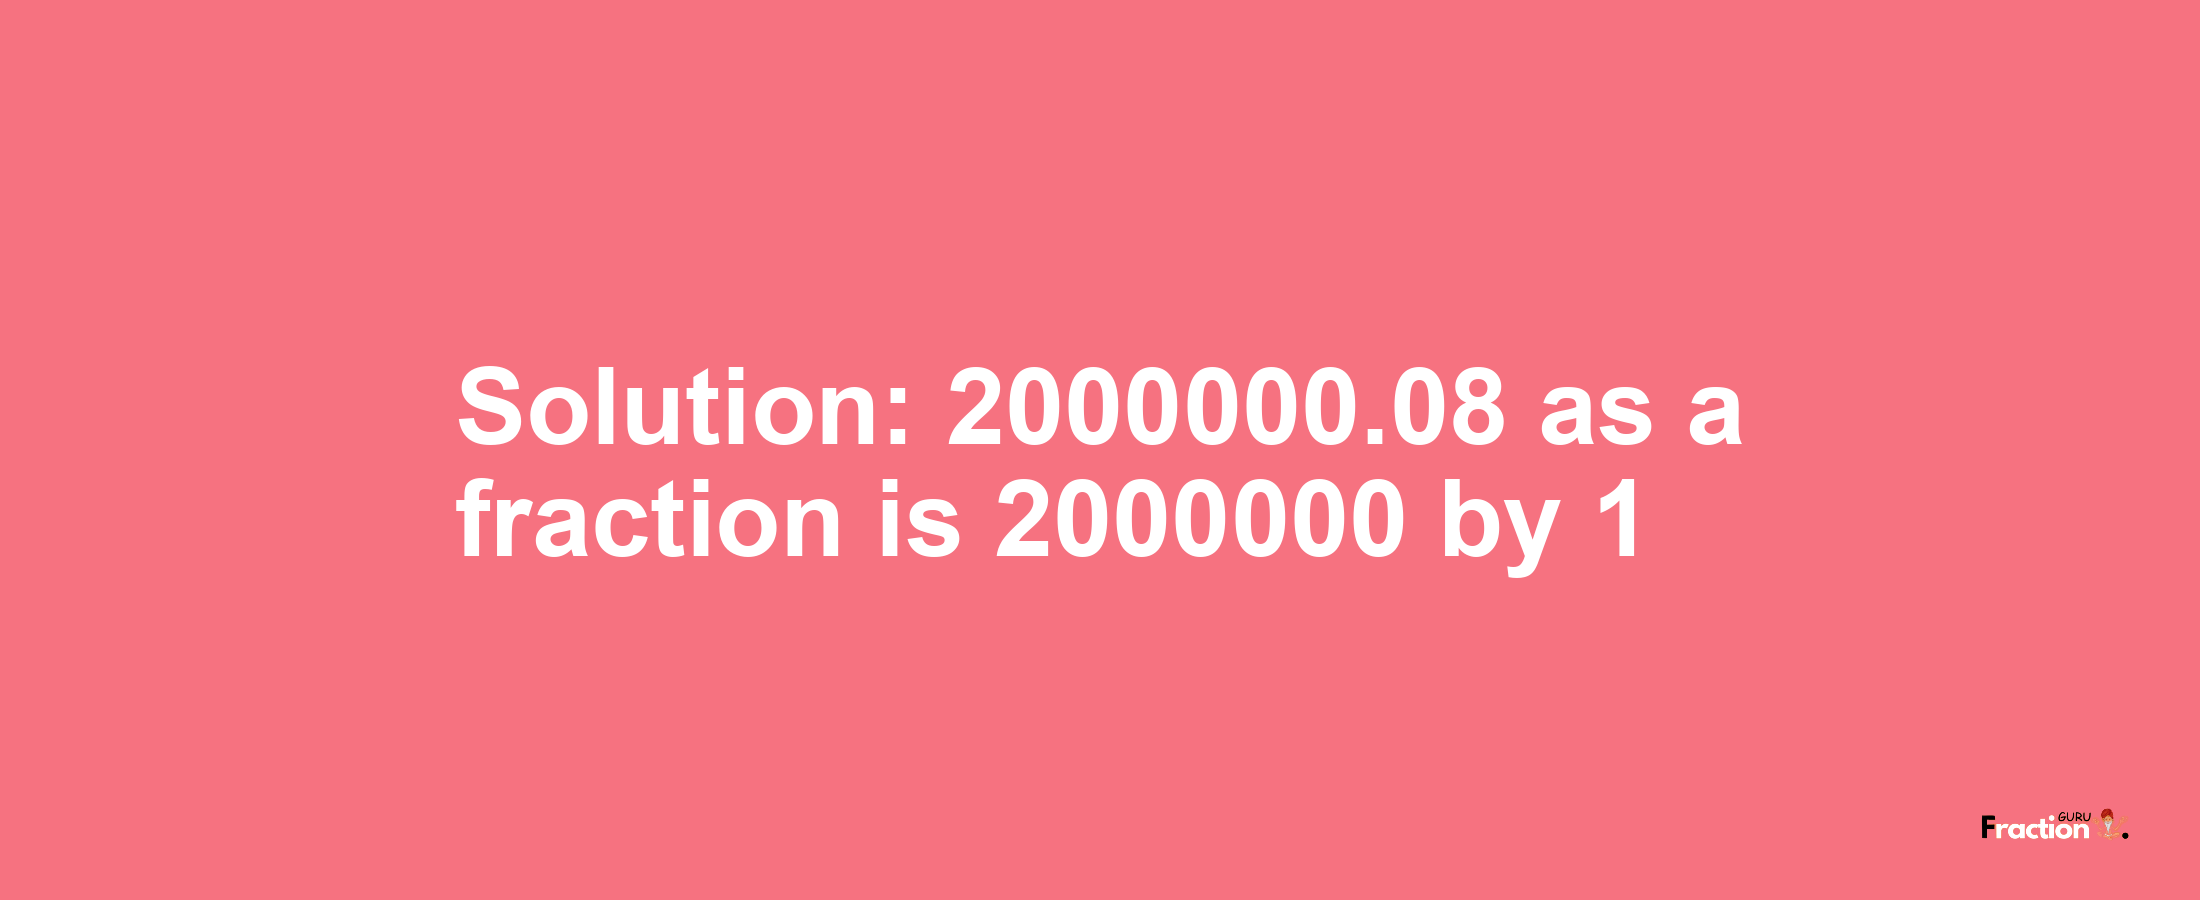 Solution:2000000.08 as a fraction is 2000000/1